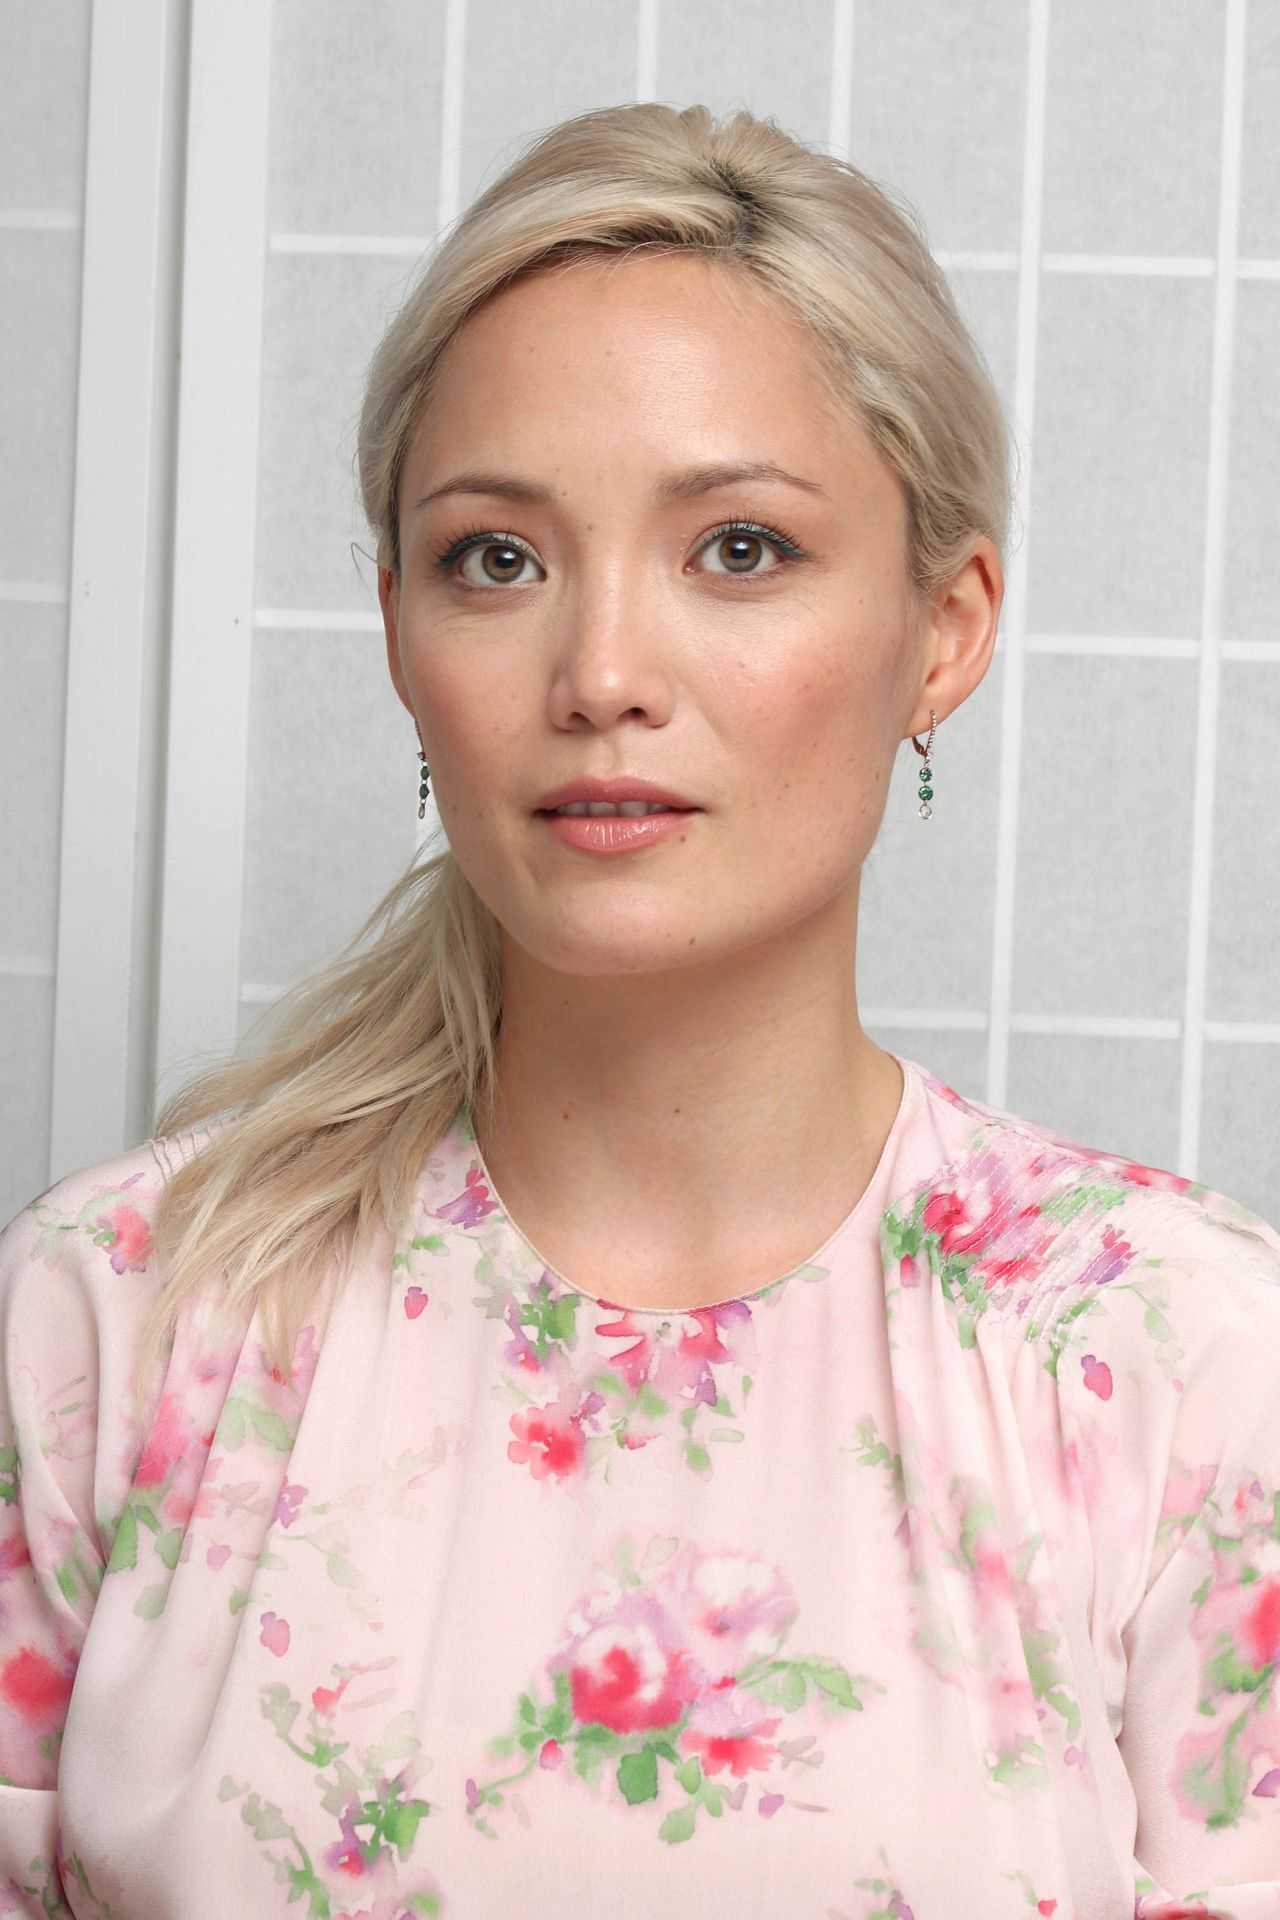 70+ Hot Pictures Of Pom Klementieff Who Plays Mantis In Marvel Cinematic Universe 133